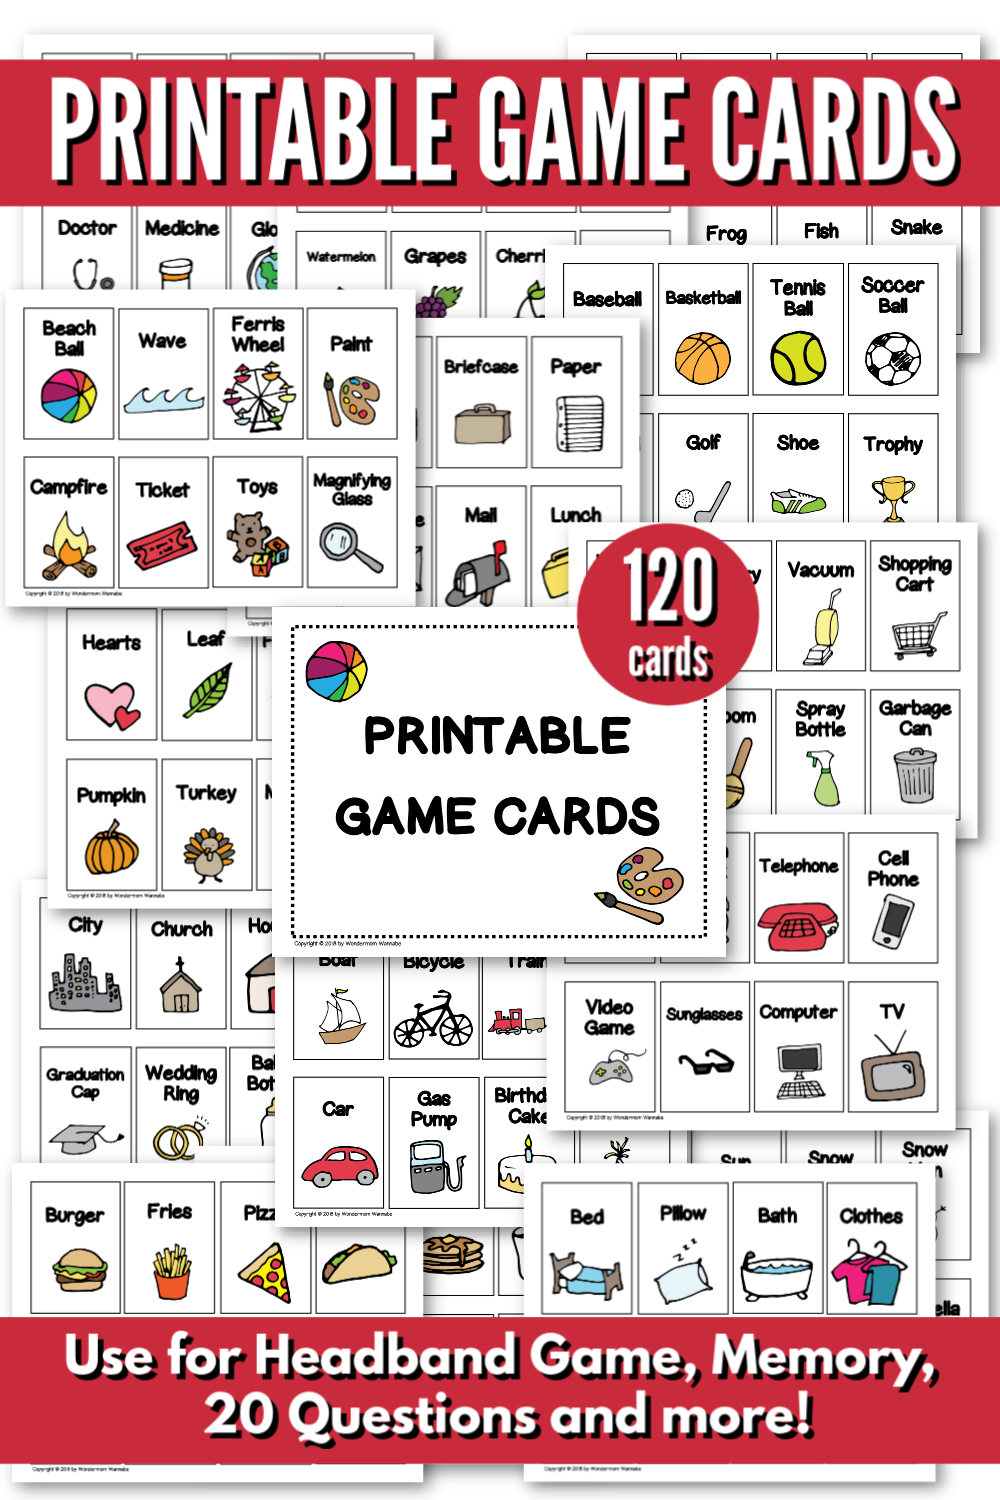 Printable Game Cards for Headband Game, Memory, or 20 Questions